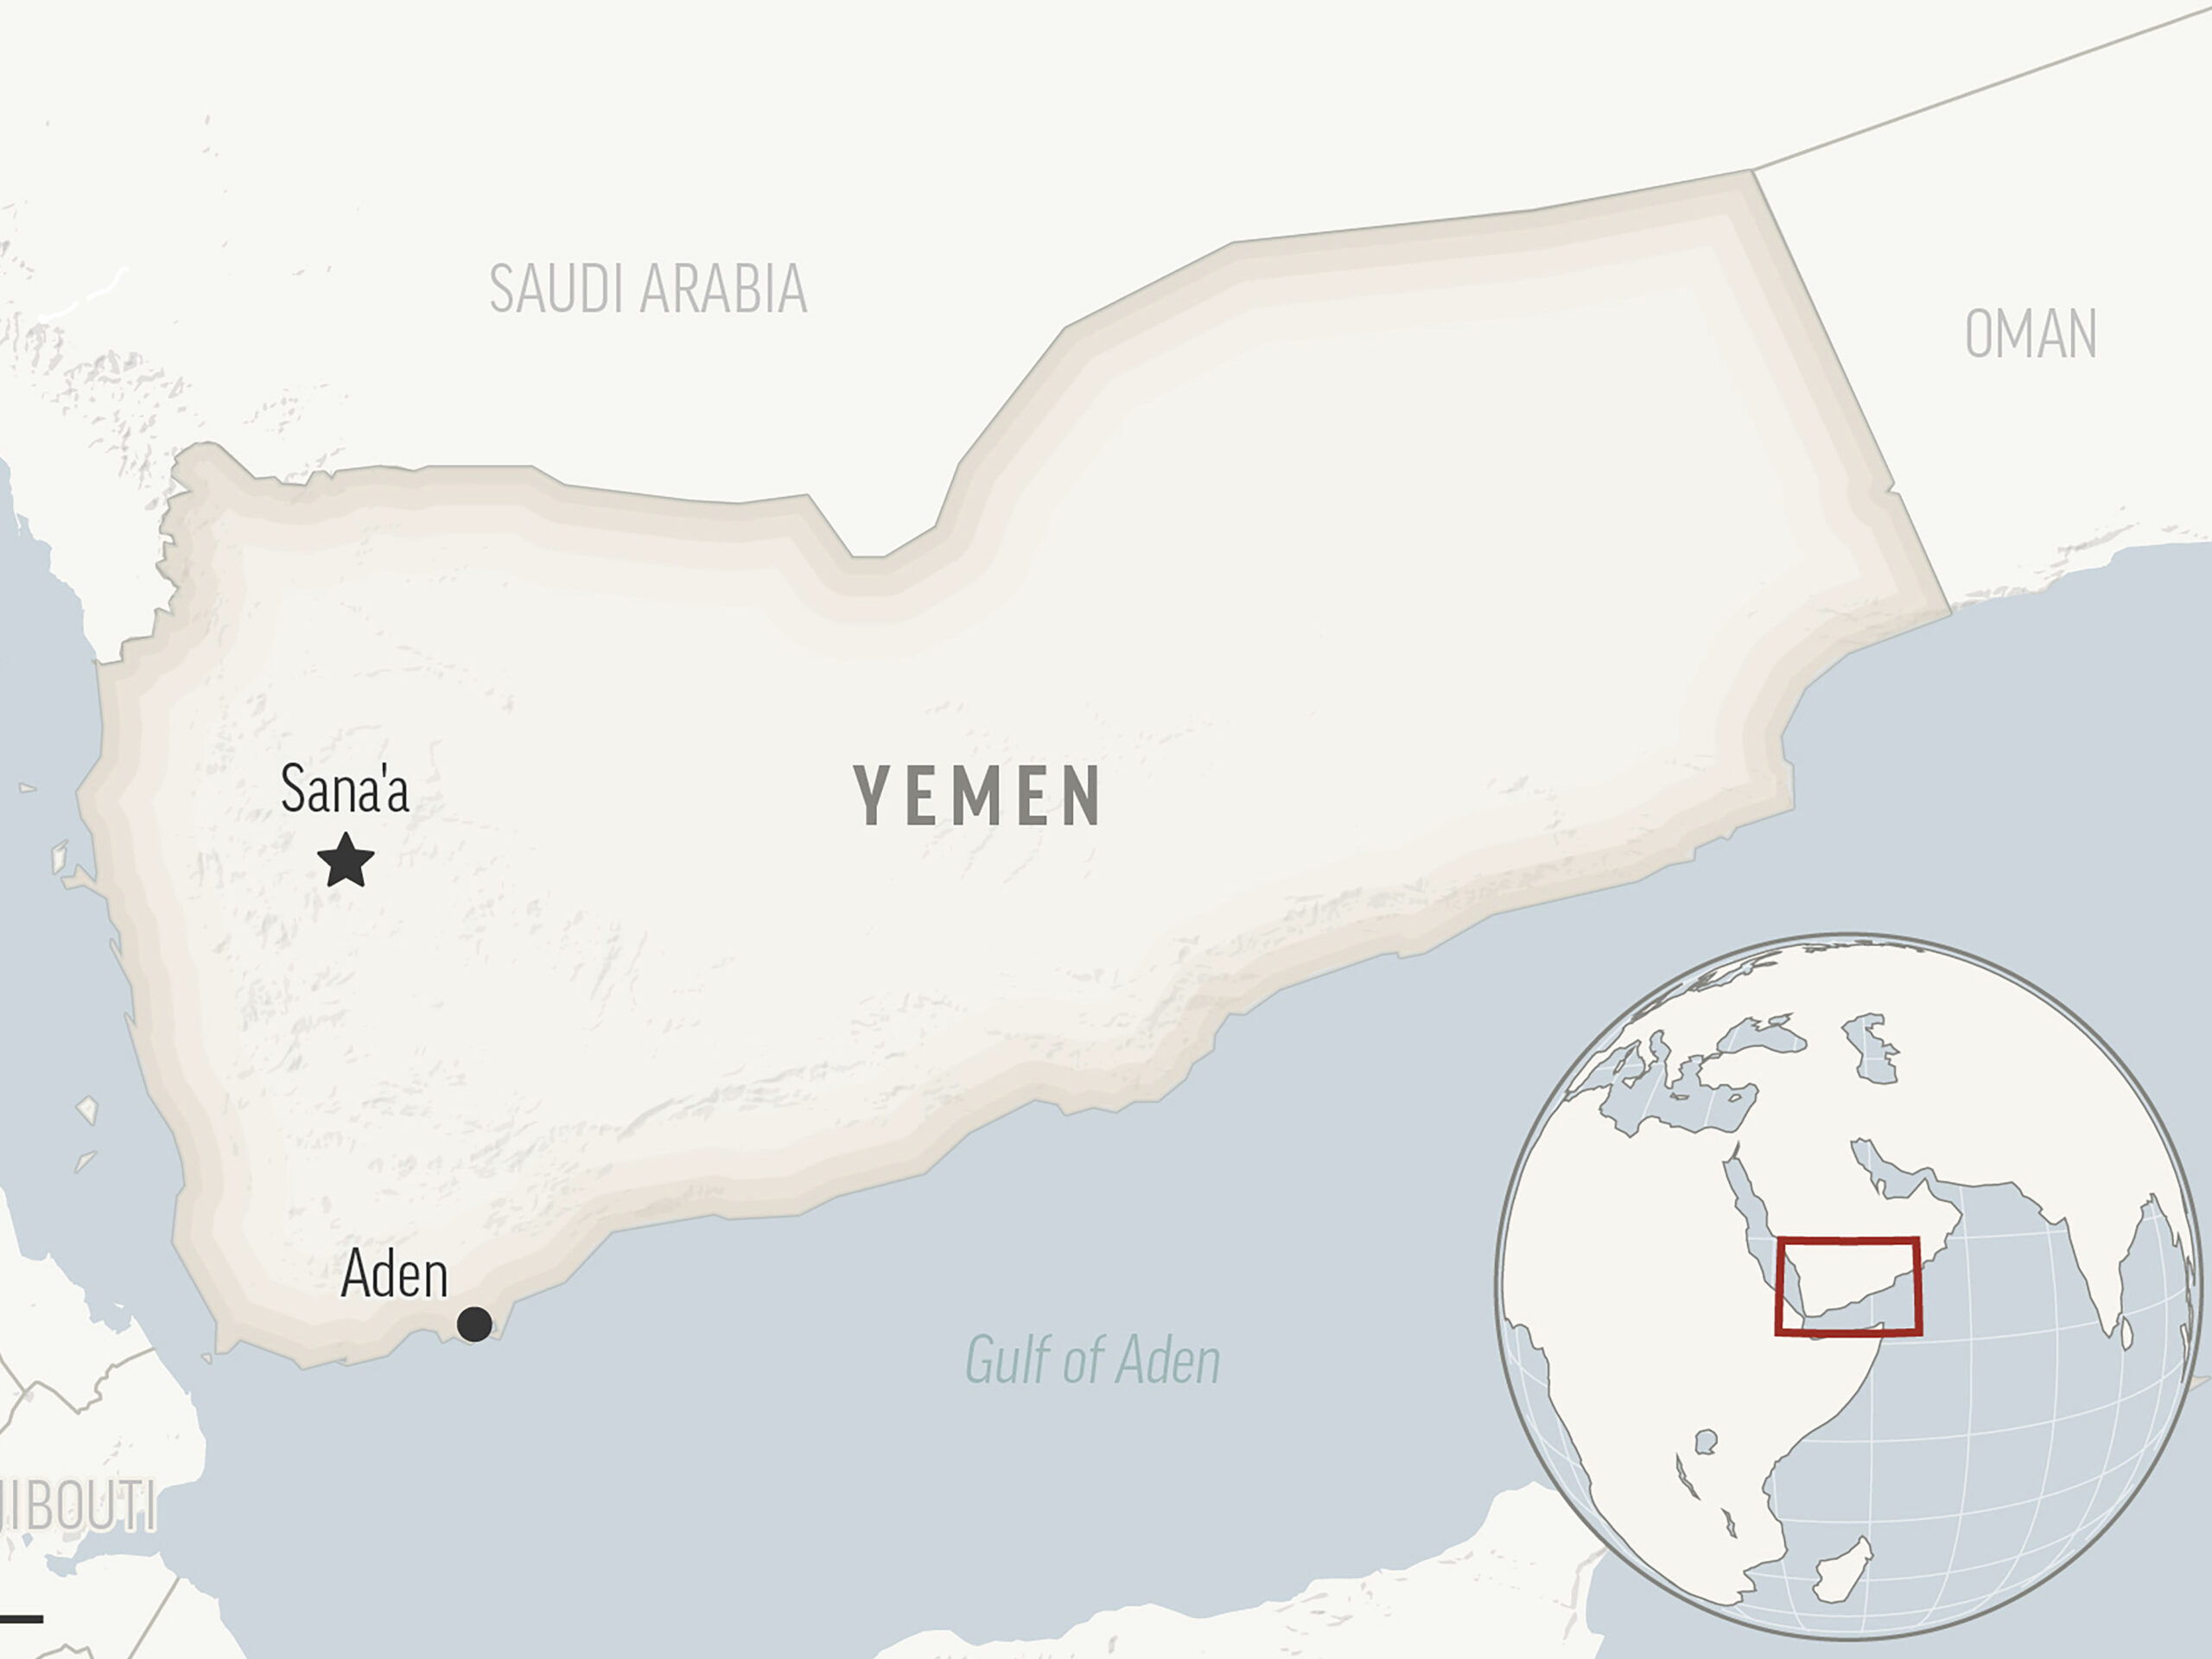 Yemen’s rebels target Singapore-flagged ship as U.S. and allies down Houthi drones